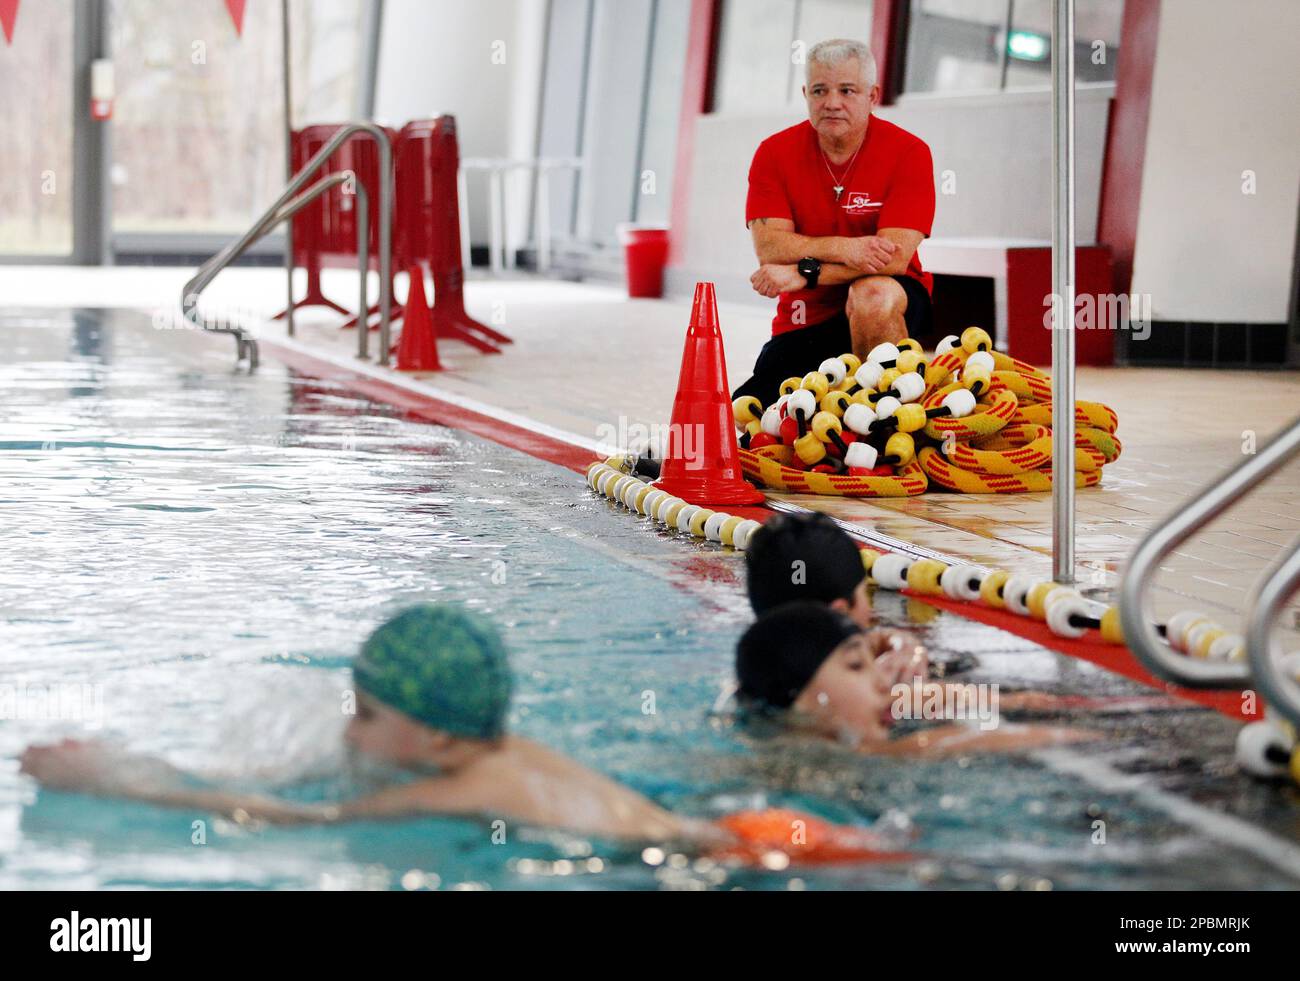 Essen, Germany. 09th Mar, 2023. Swimming supervisor Enrique Gonzalez watches the action in the pool at the Thurmfeld Sports Pool. The pools are looking for staff for the outdoor pool season. If the required 50 lifeguards are missing in the summer, many outdoor pools could remain closed. (to dpa: "When the lifeguard is missing - outdoor pools are looking for staff for the summer") Credit: Roland Weihrauch/dpa/Alamy Live News Stock Photo